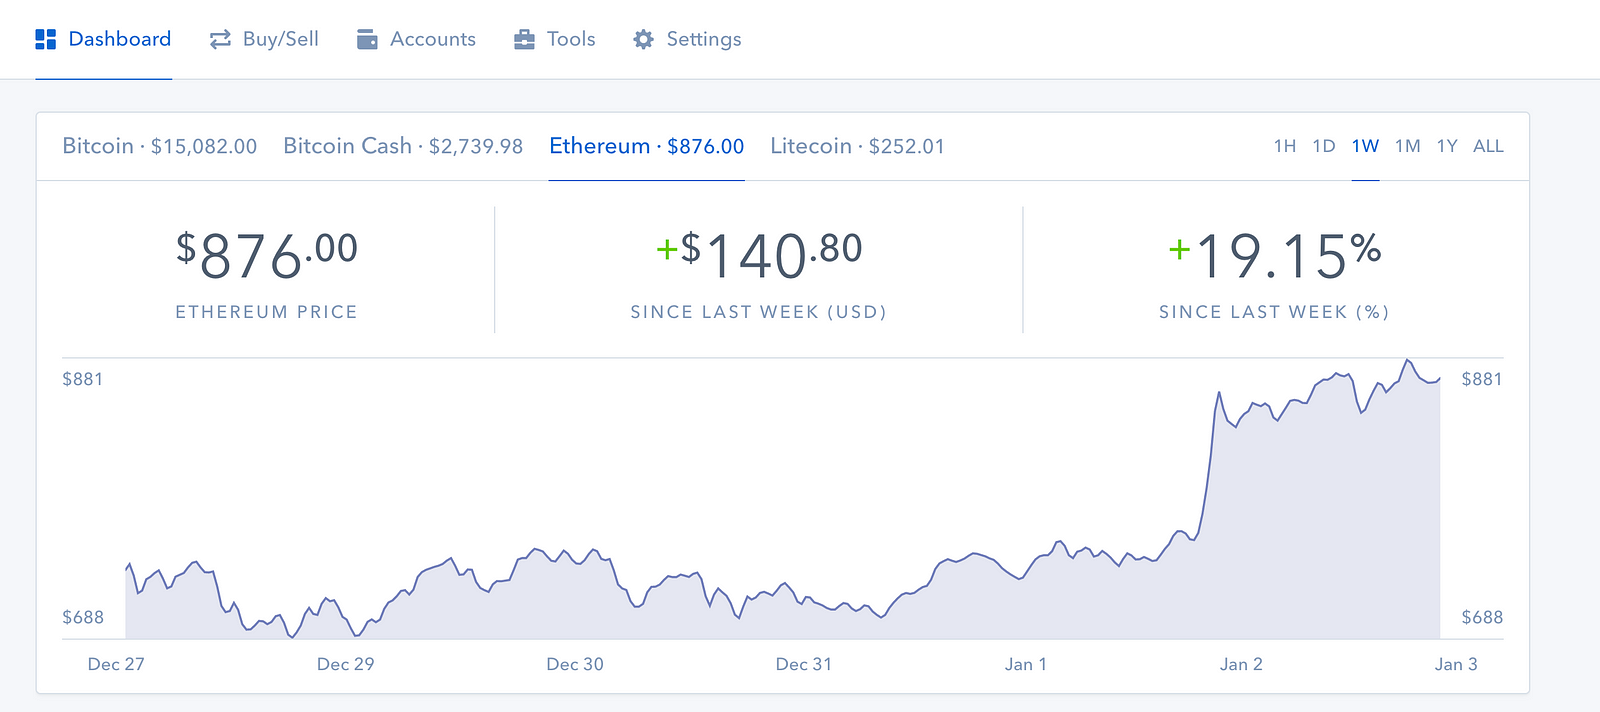 does coinbase have transaction history